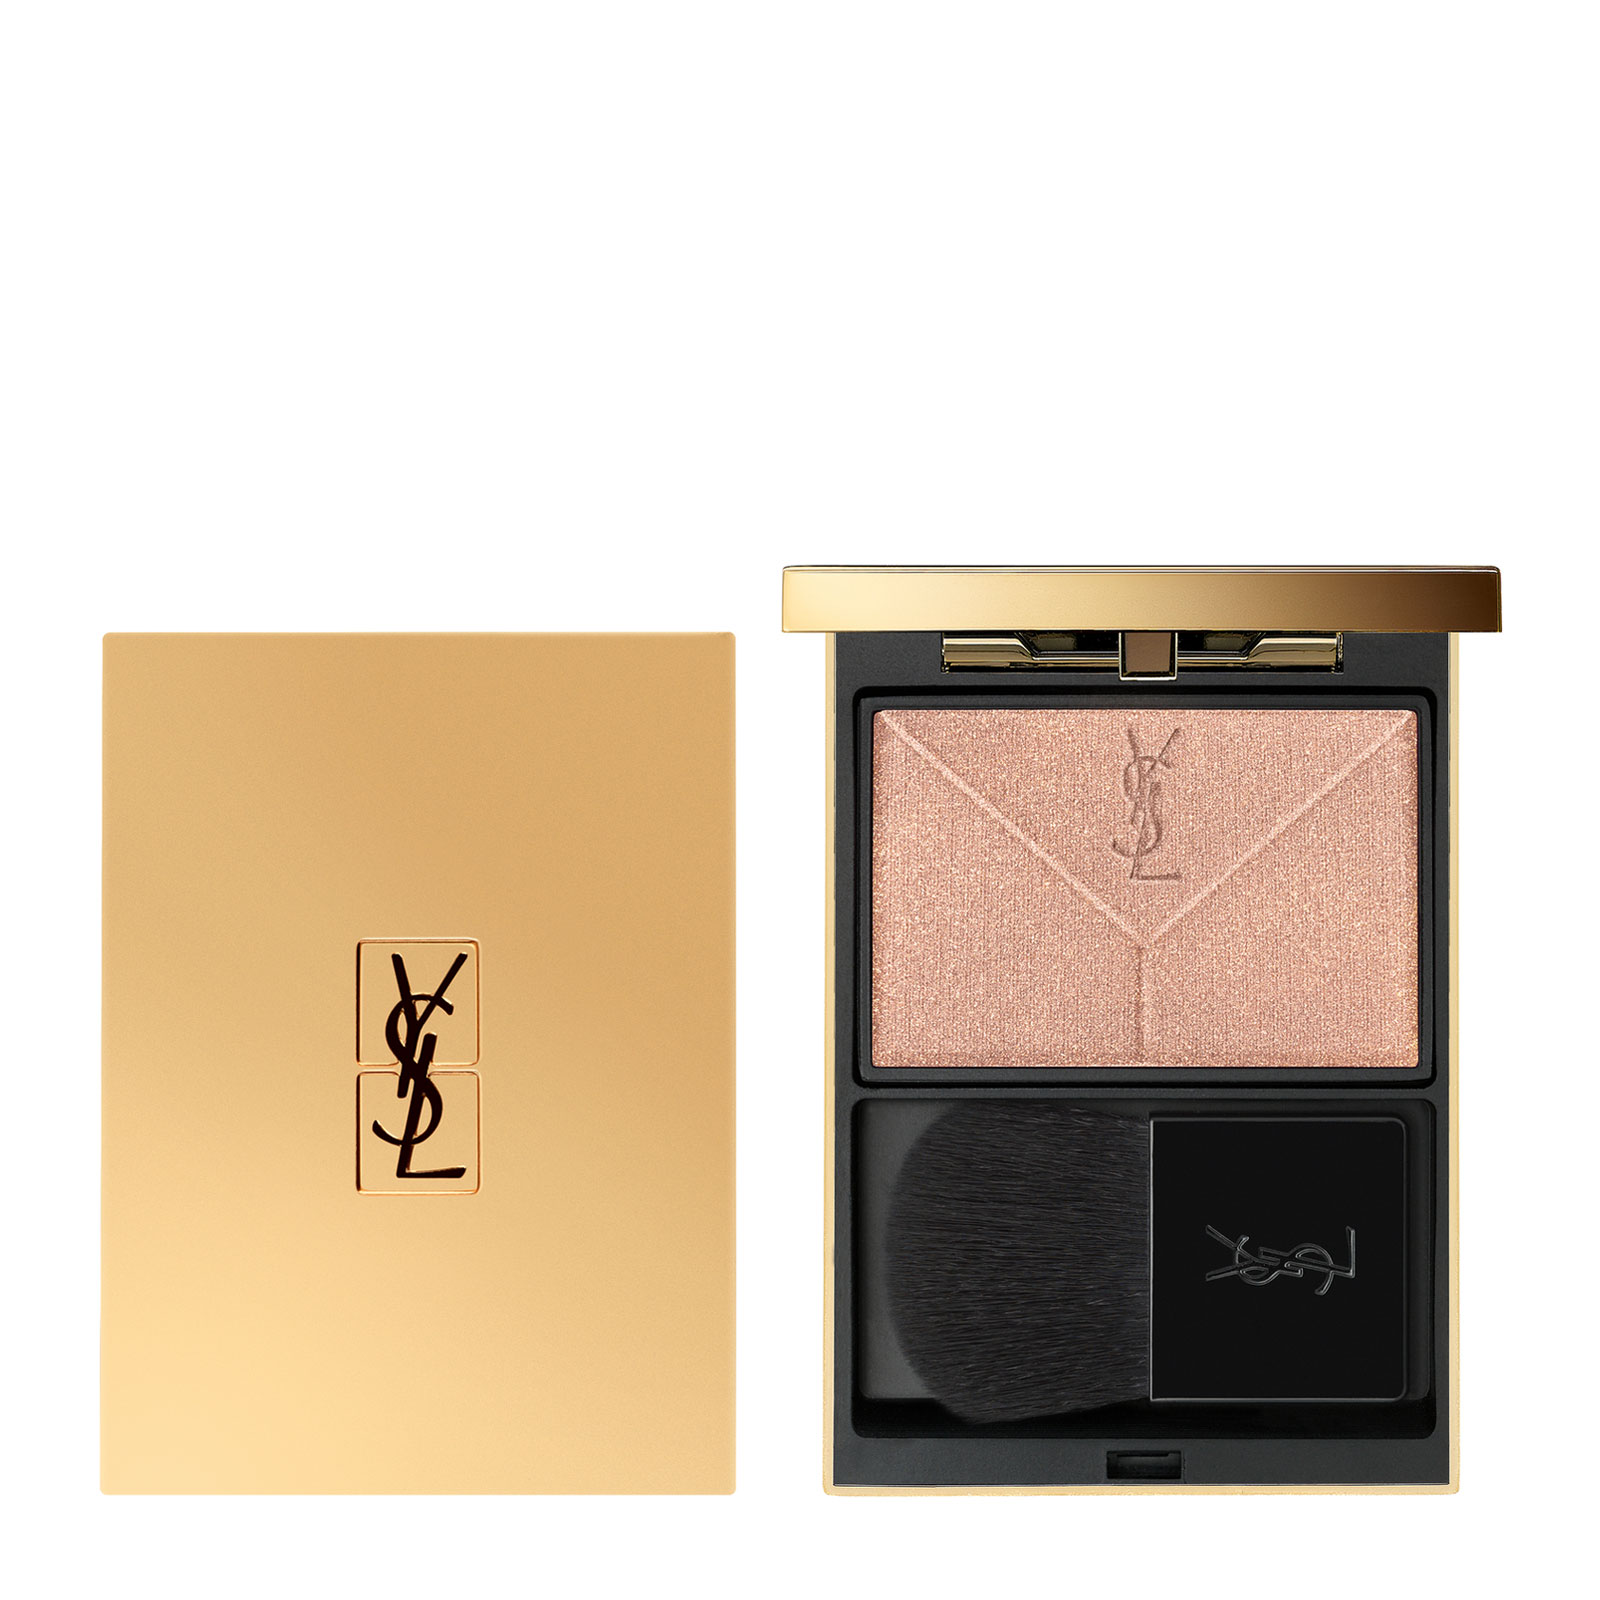 Ysl Beauty Couture Highlighter 3G N1 Or Pearl